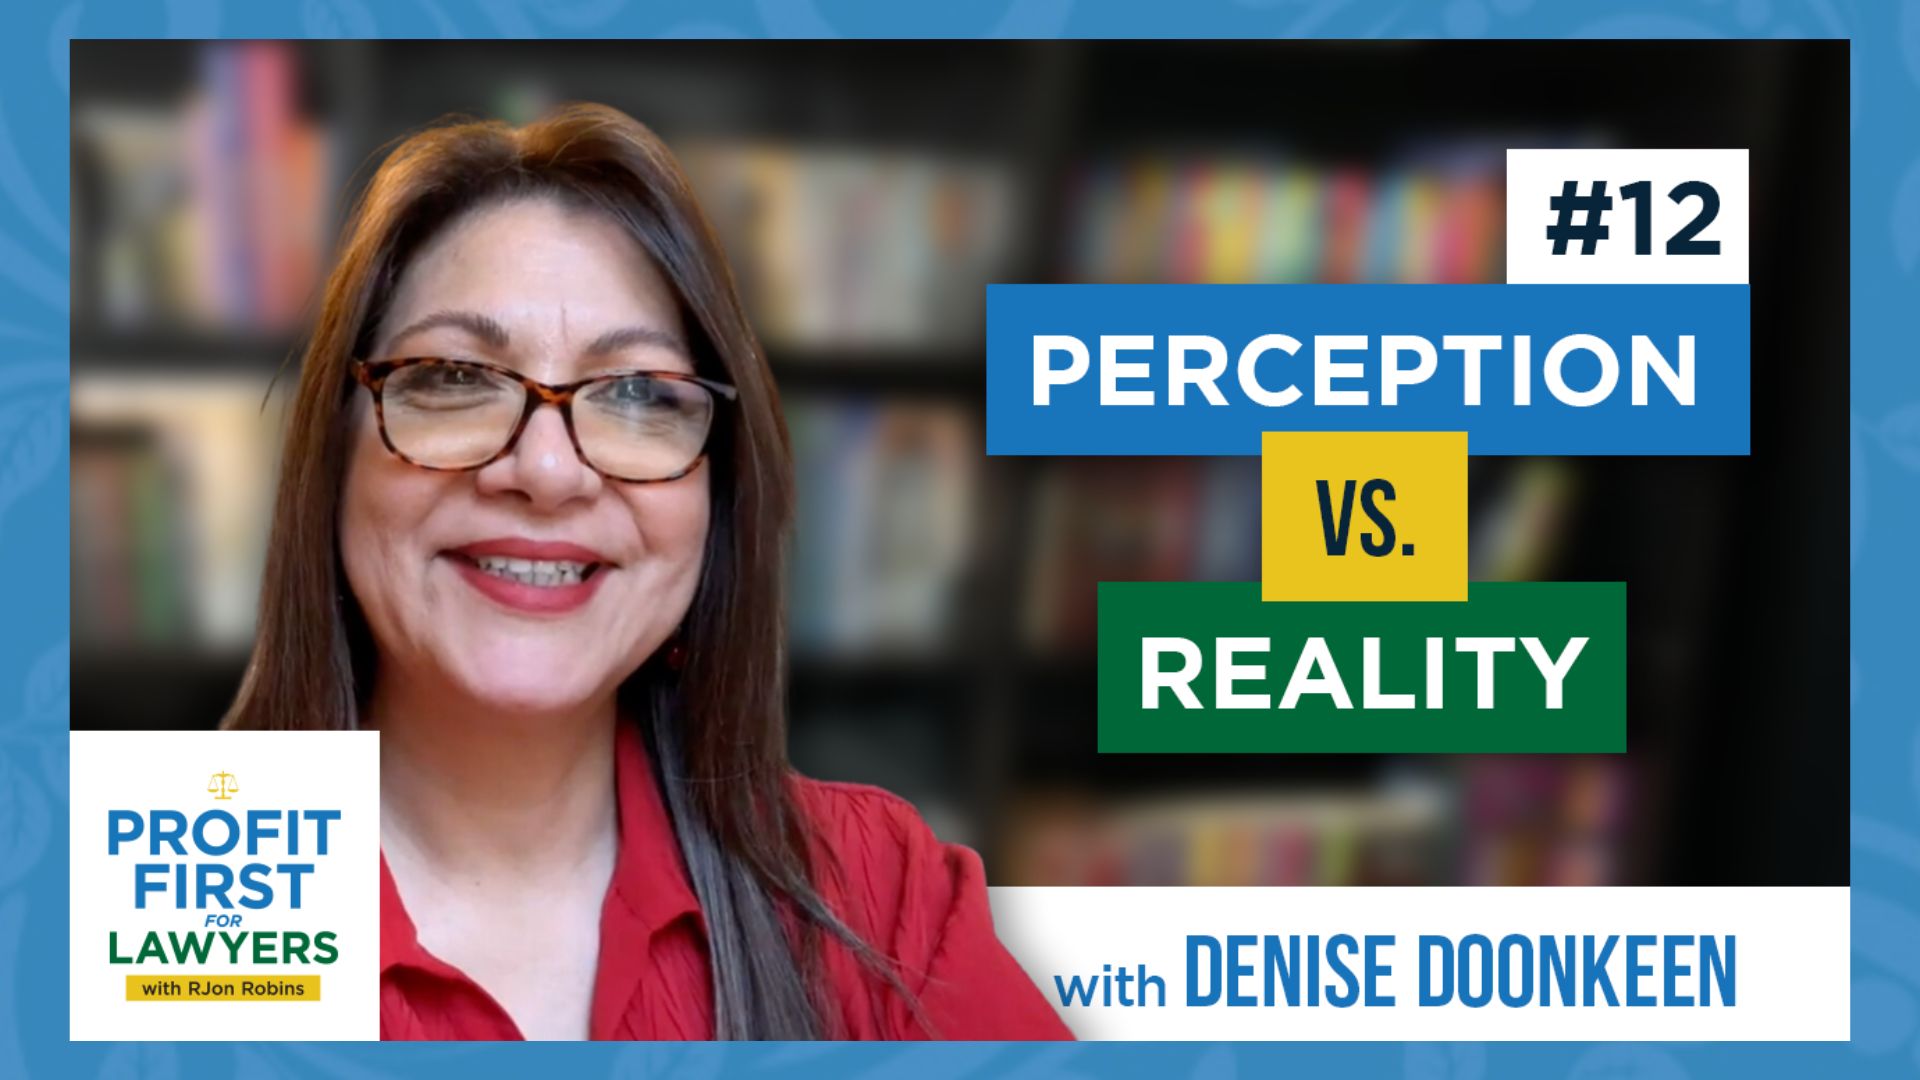 Profit First For Lawyers podcast episode 12 featuring Denise Doonkeen on the topic of Perception vs. Reality